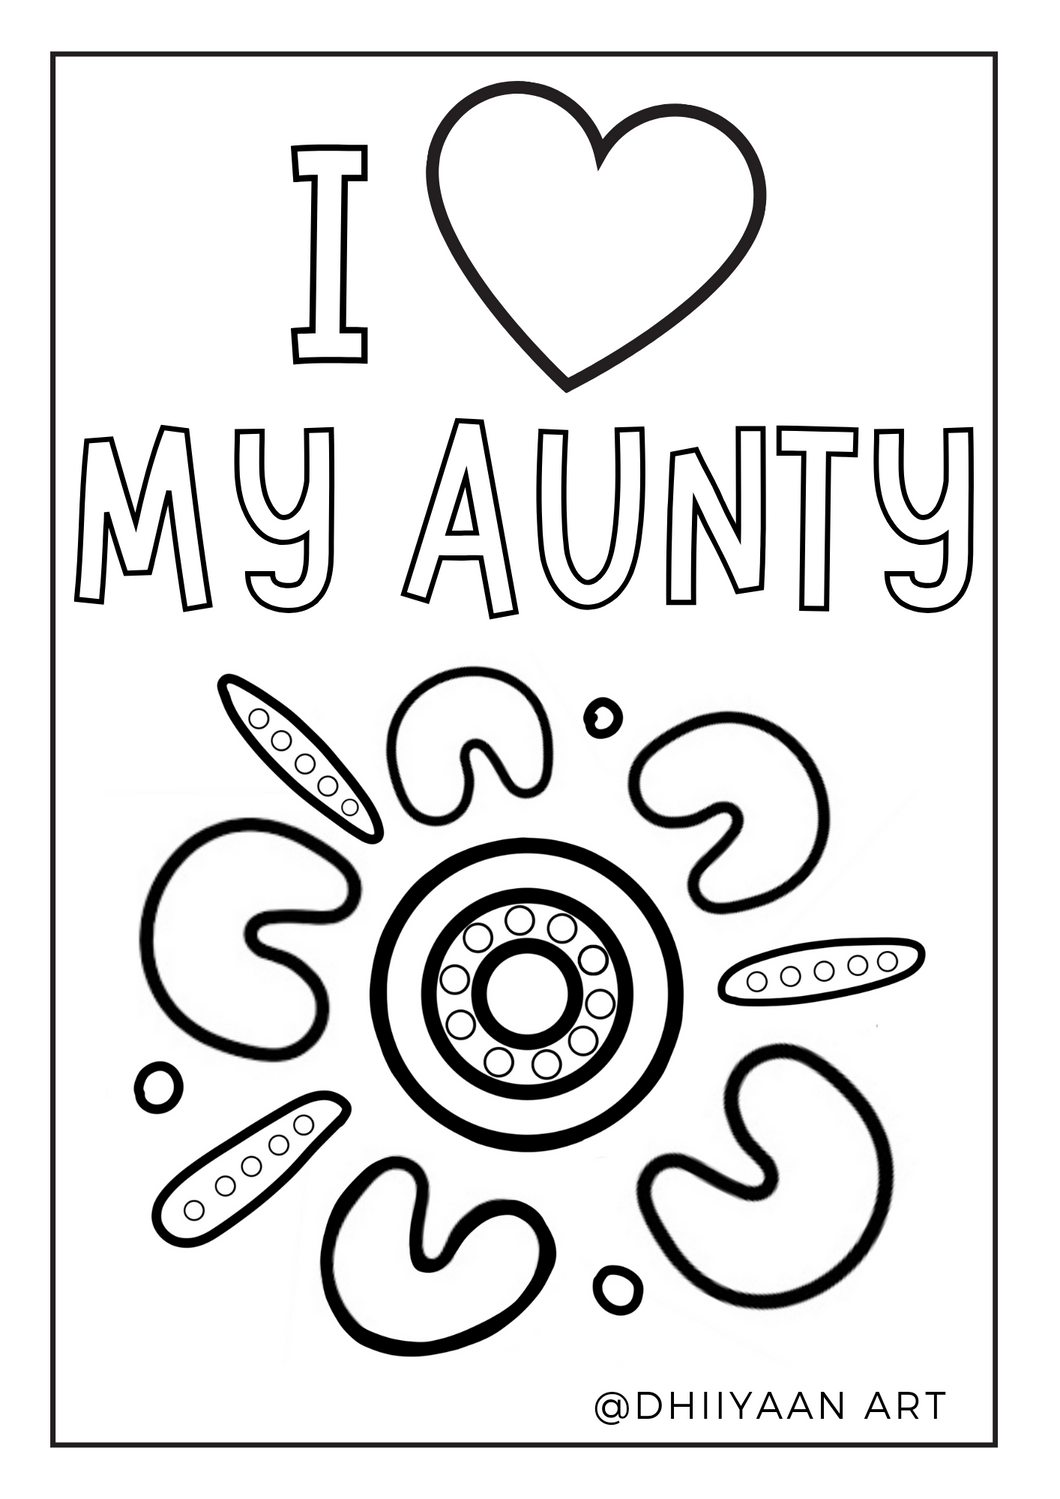 (Aunty) Mother's Day Colouring in sheet